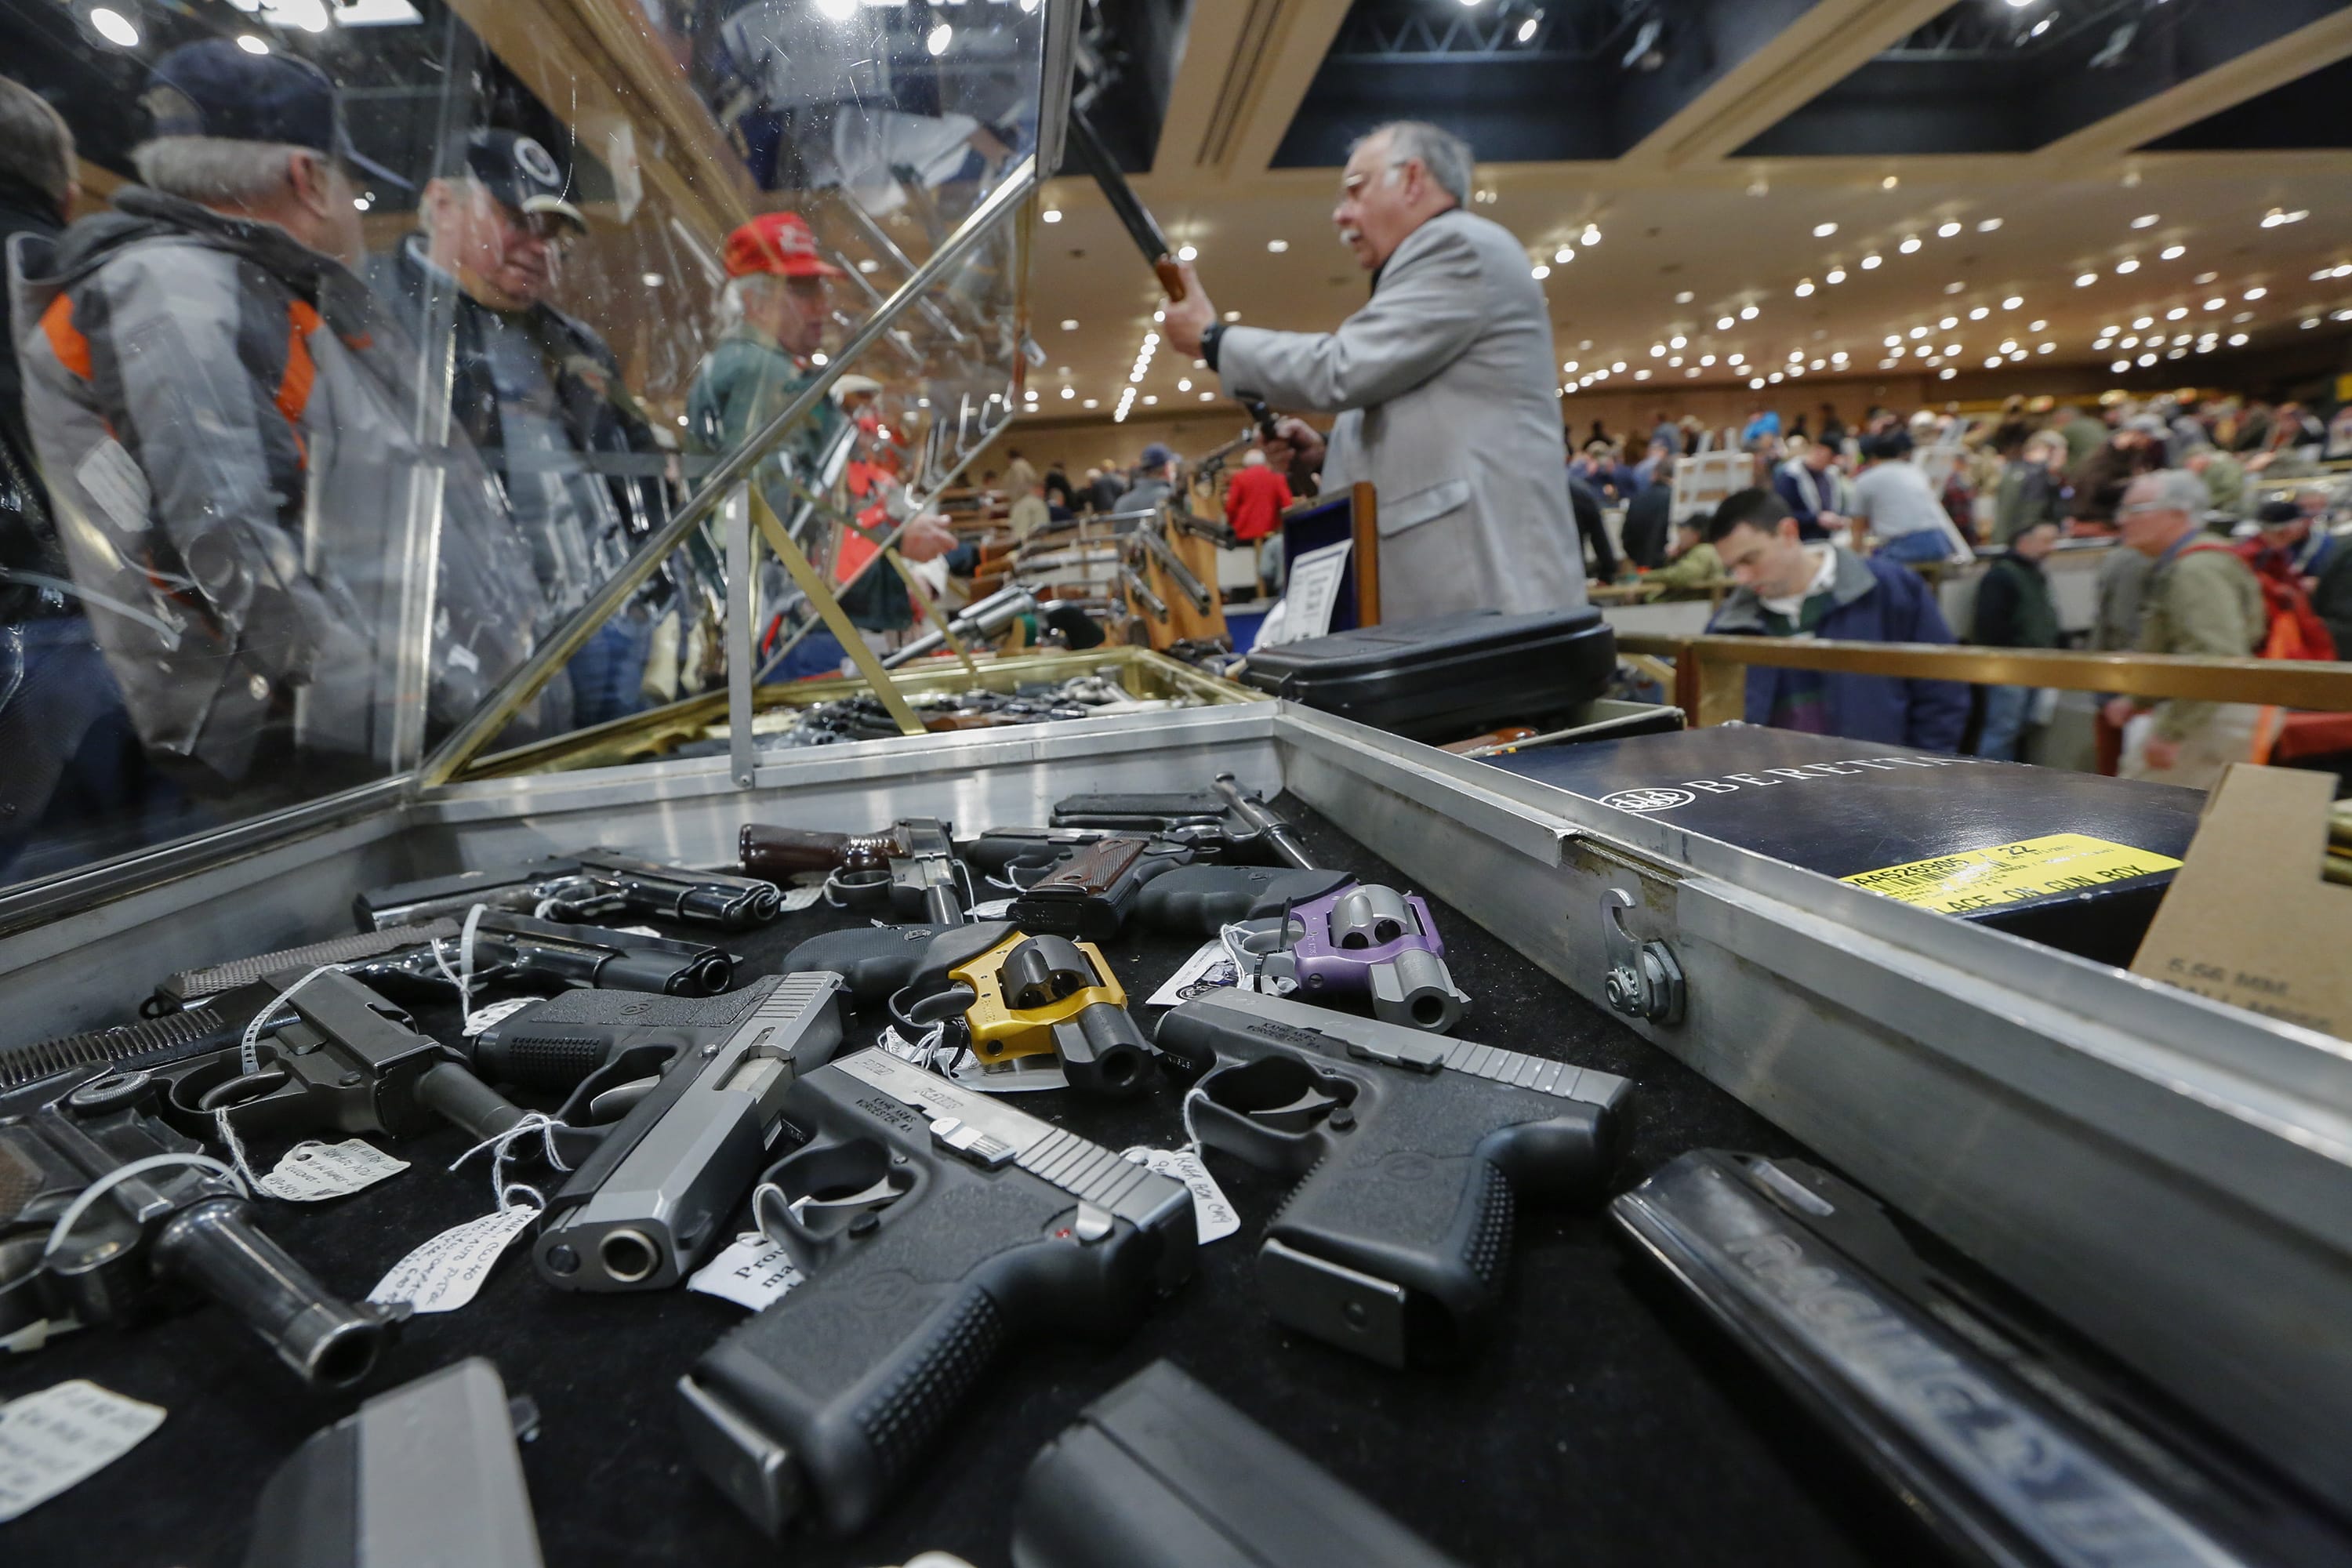 Handguns appear on display at the table of David Petronis of Mechanicville, N.Y., standing with rifle, who owns a gun store, during the heavily attended annual New York State Arms Collectors Association Albany Gun Show at the Empire State Plaza Convention Center in Albany, N.Y.